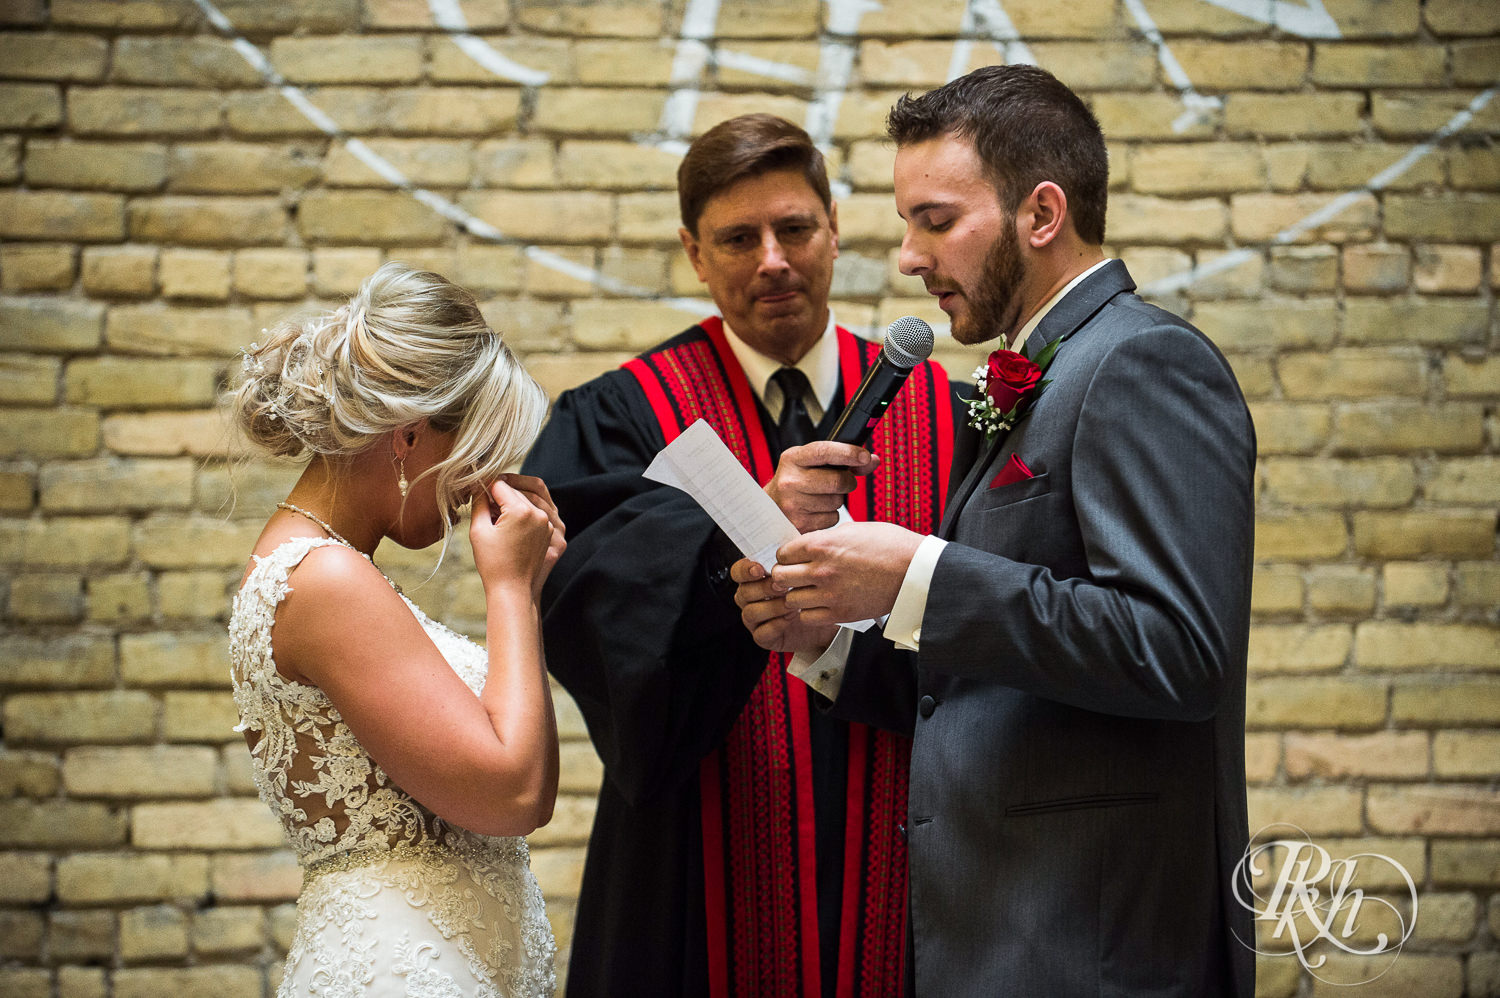 Bride and groom read vows during wedding ceremony at the Lumber Exchange Event Center in Minneapolis, Minnesota.